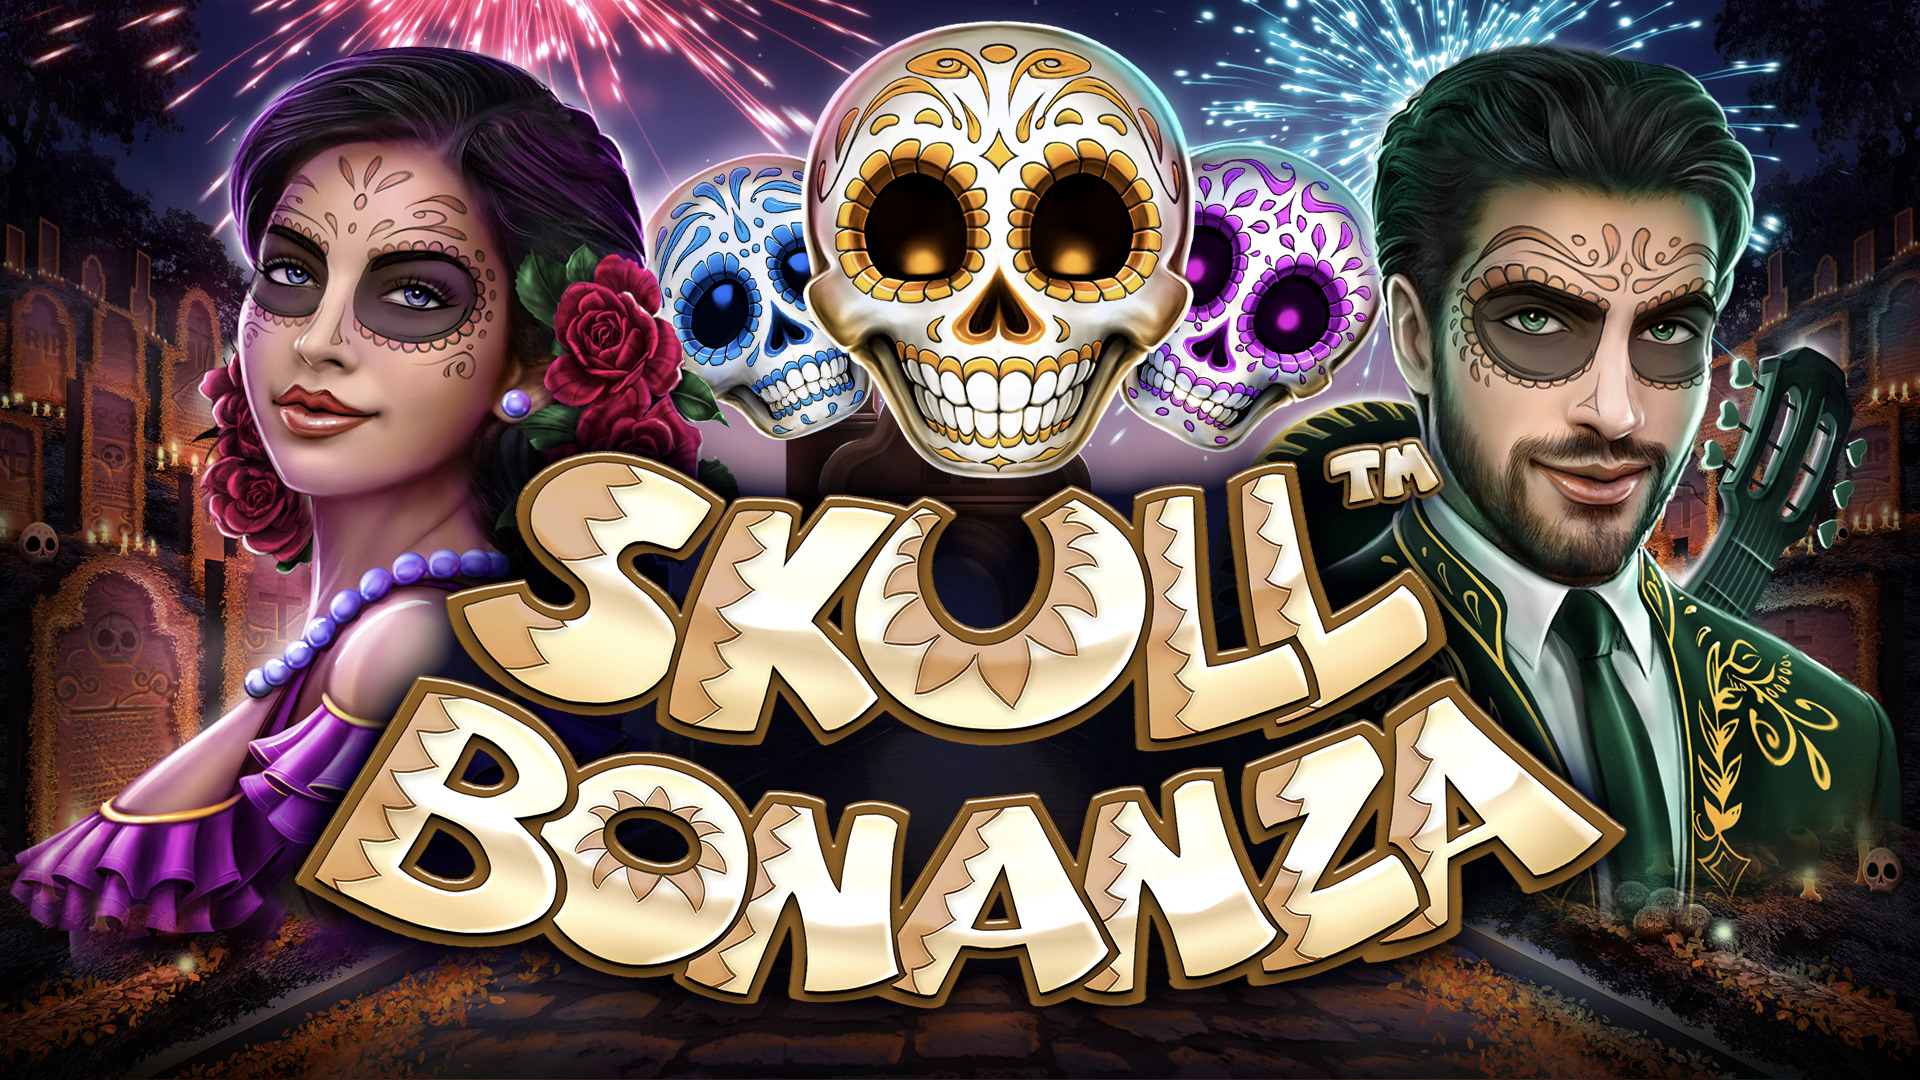 Skull Bonanza is a 5x3, nine-payline video slot that incorporates a maximum win potential of up to x10,000 the bet.